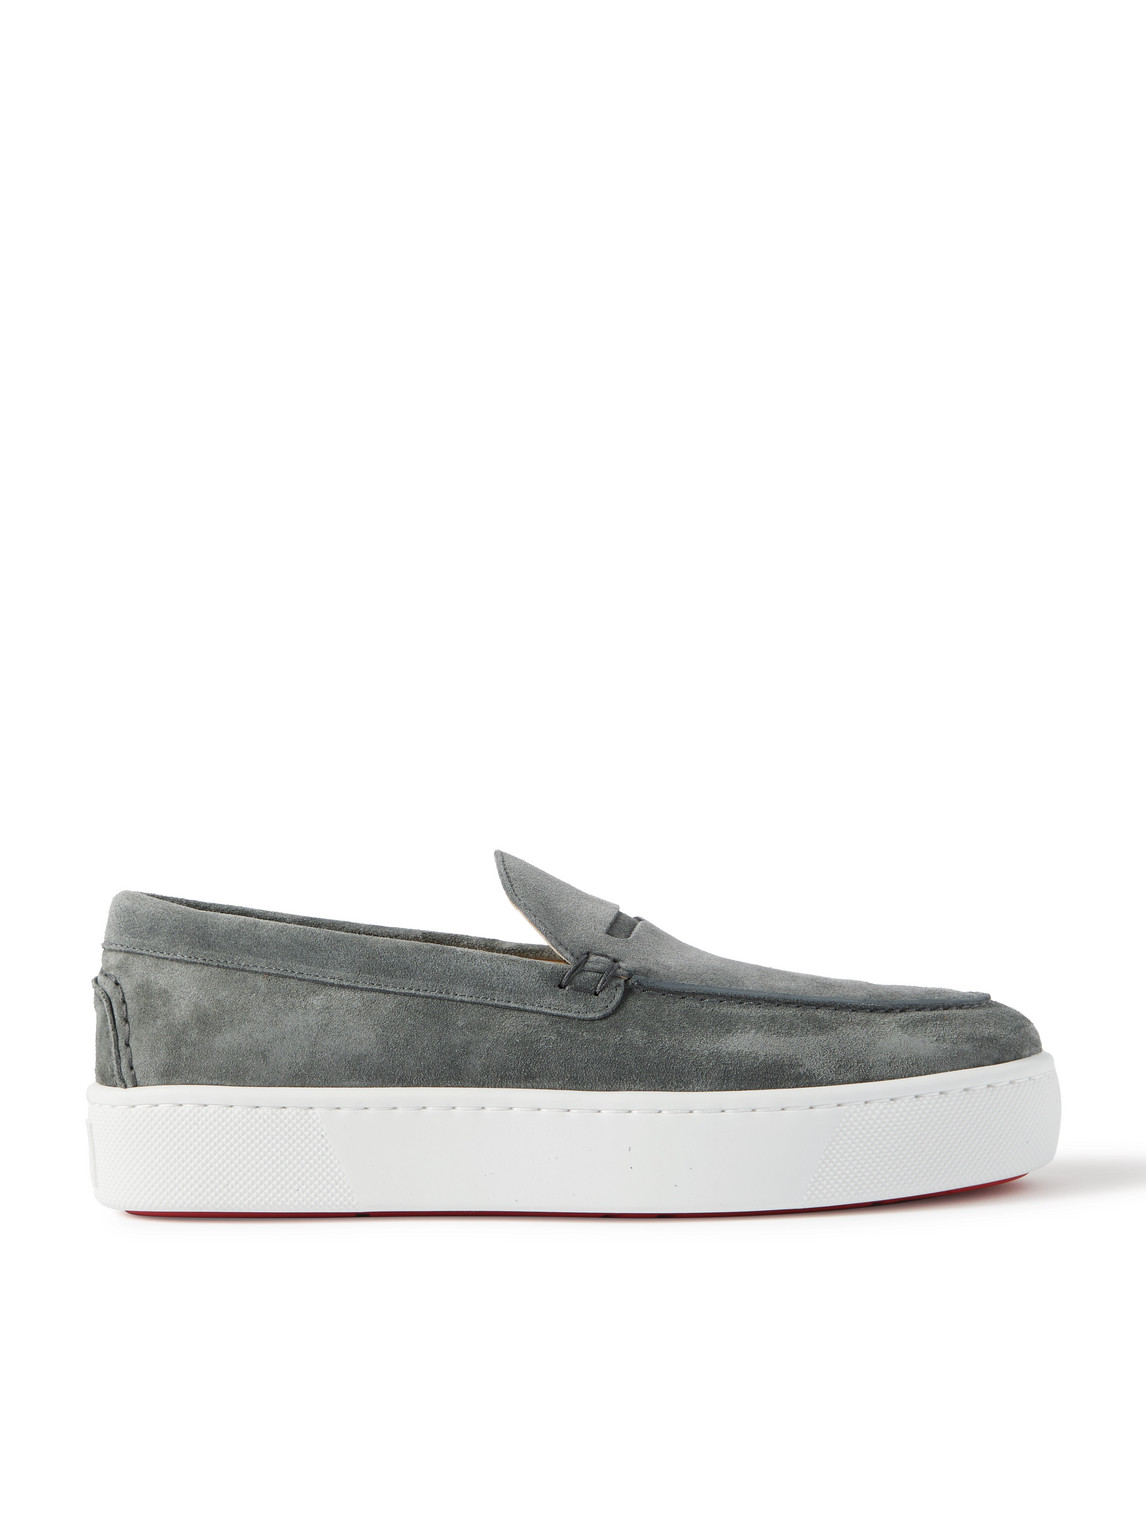 Christian Louboutin Paqueboat Suede Penny Loafers In Gray